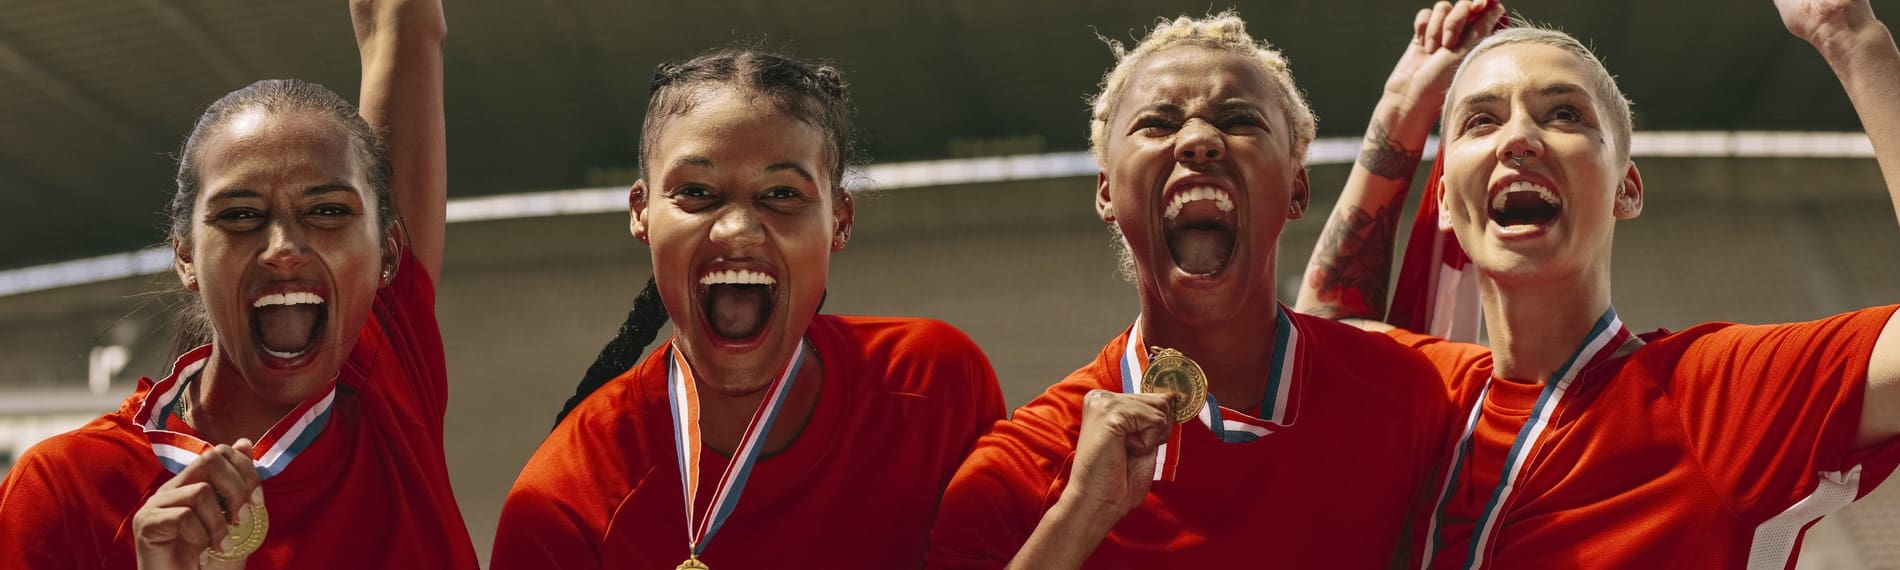 The Future is Female: Exploring the Growth of Women’s Sports